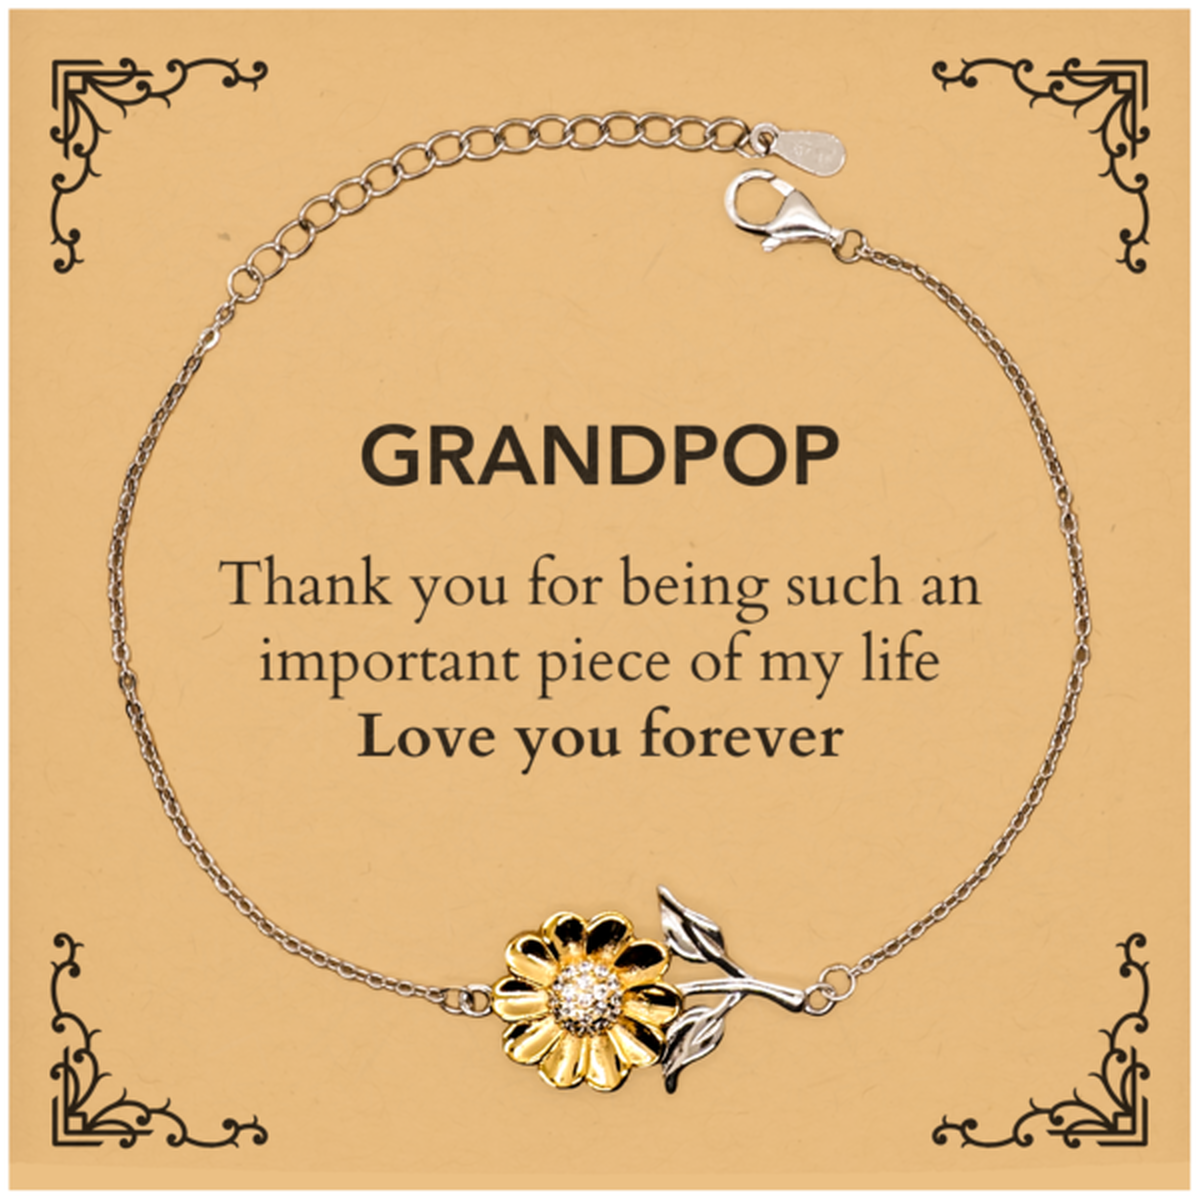 Appropriate Grandpop Sunflower Bracelet Epic Birthday Gifts for Grandpop Thank you for being such an important piece of my life Grandpop Christmas Mothers Fathers Day